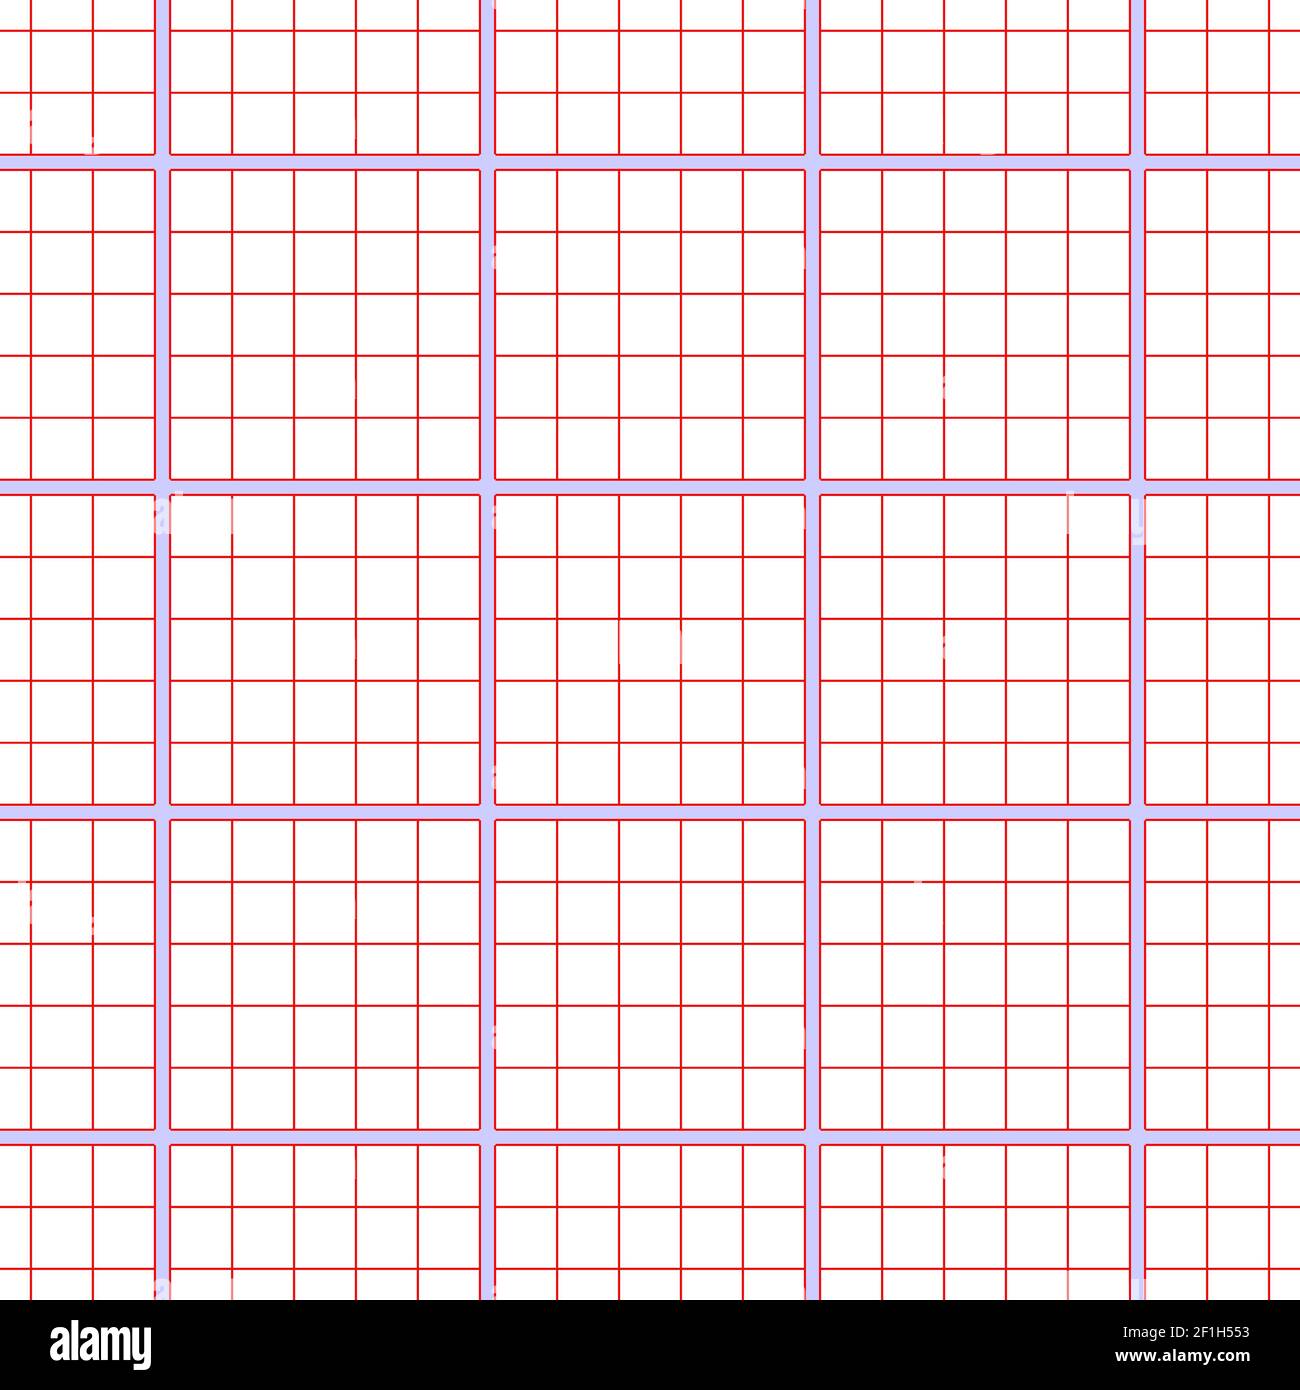 Vector seamless pattern paper exercise book in a cell.Texture notebook sheet. Stock Photo